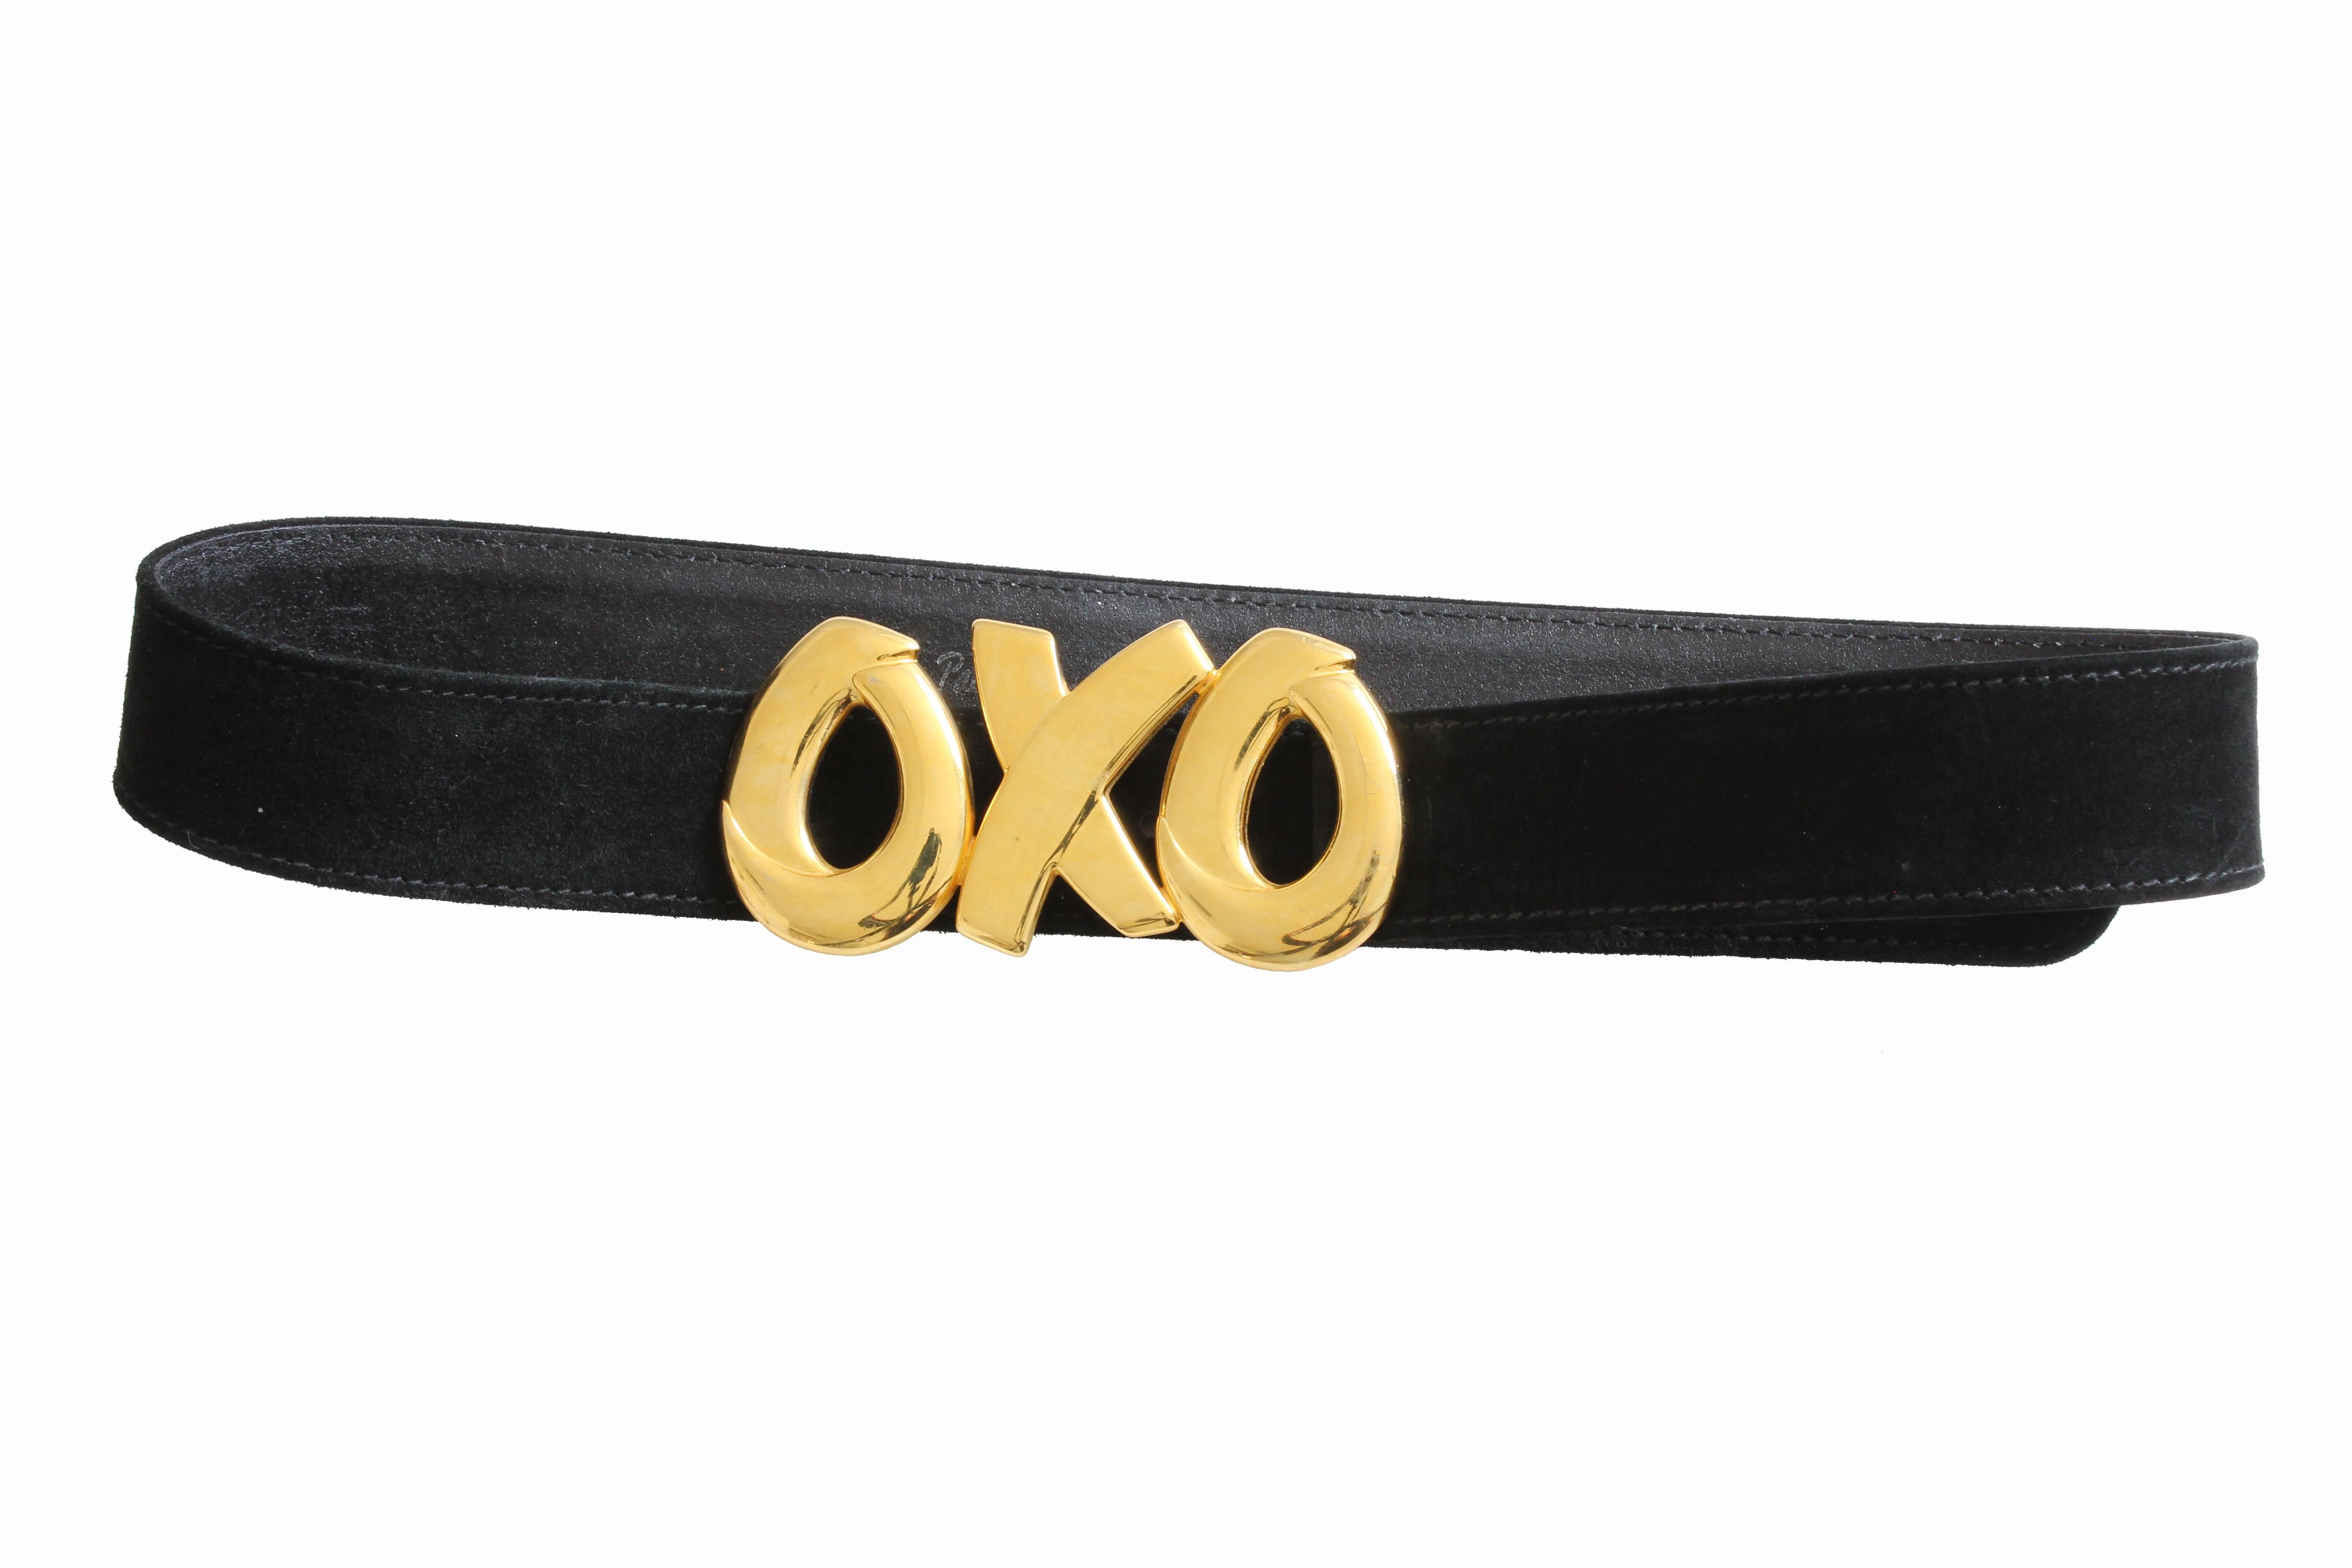 Here's a cool belt from Paloma Picasso! Made from black suede leather, the buckle features her signature OXO logo.  The buckle measures appx 4in L x 2.2in H and the belt strap measures 1.25in H.  Best fits a waist between 29in and 31in.  In good